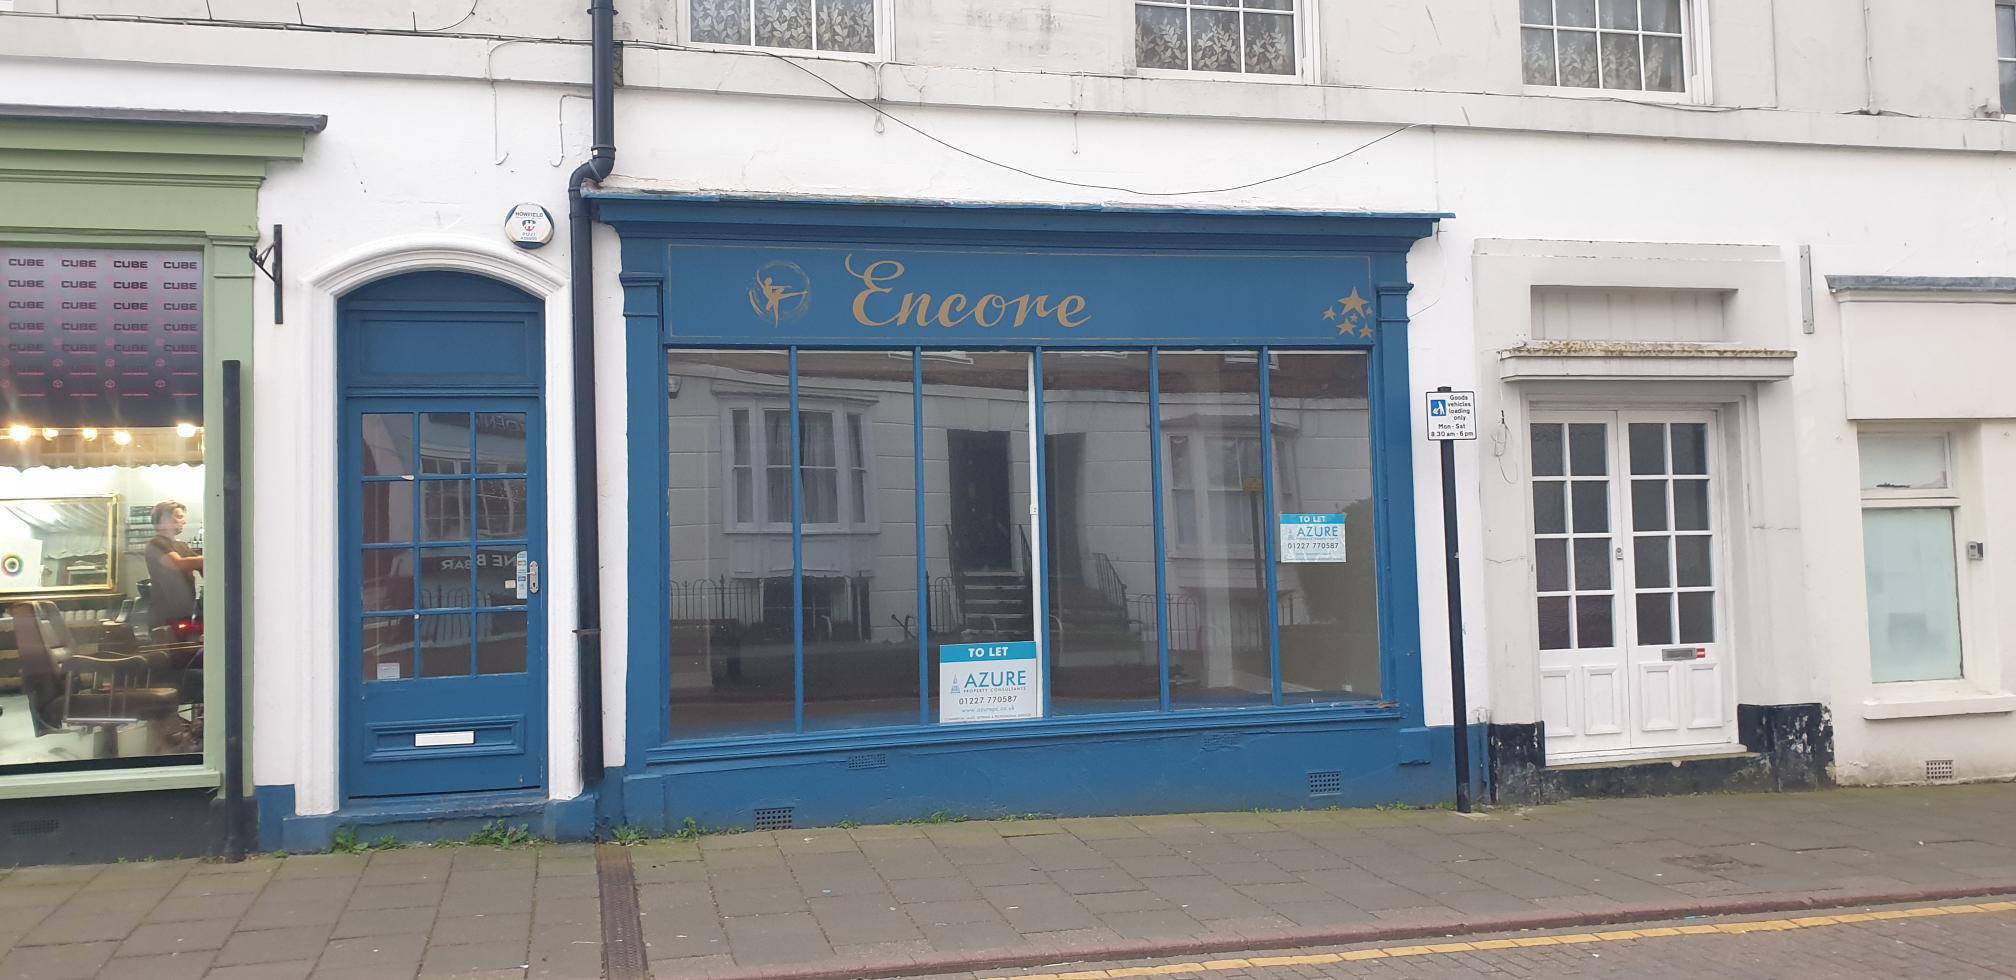 0 bed Retail Property (High Street) for rent in Herne Bay. From Azure Property Consultants